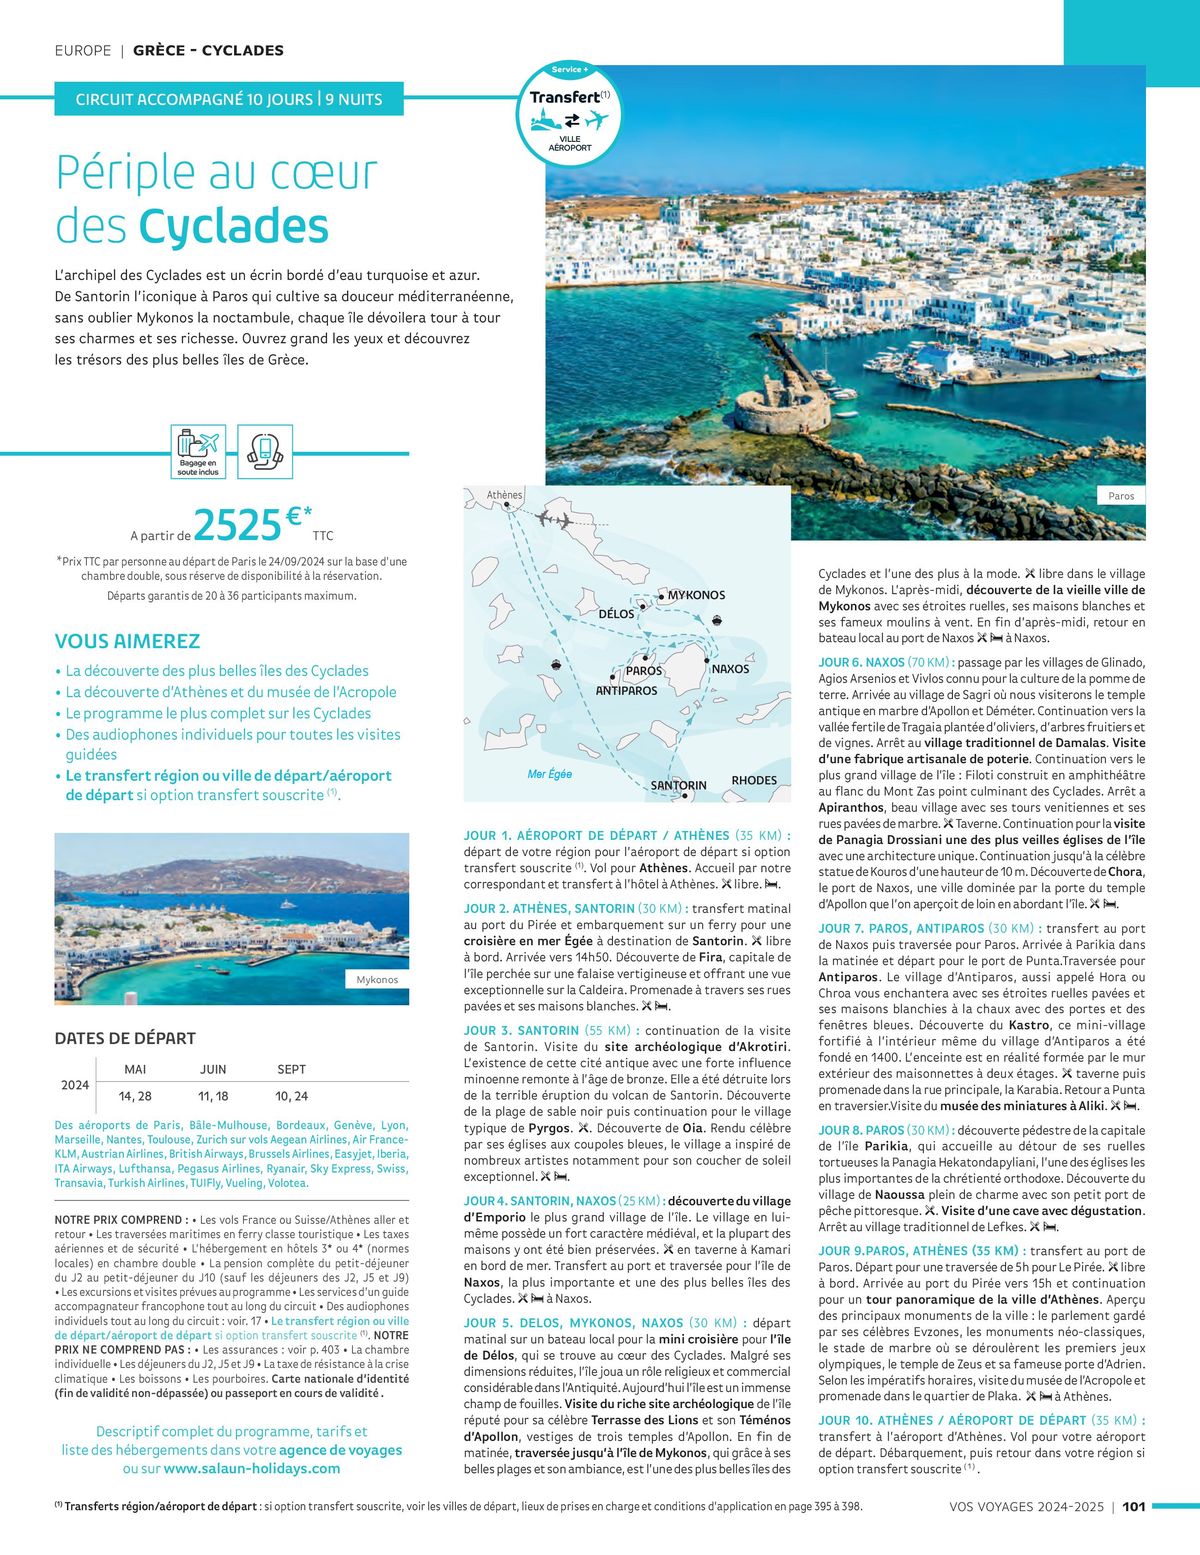 Catalogue Vos voyages 2024-2025, page 00101